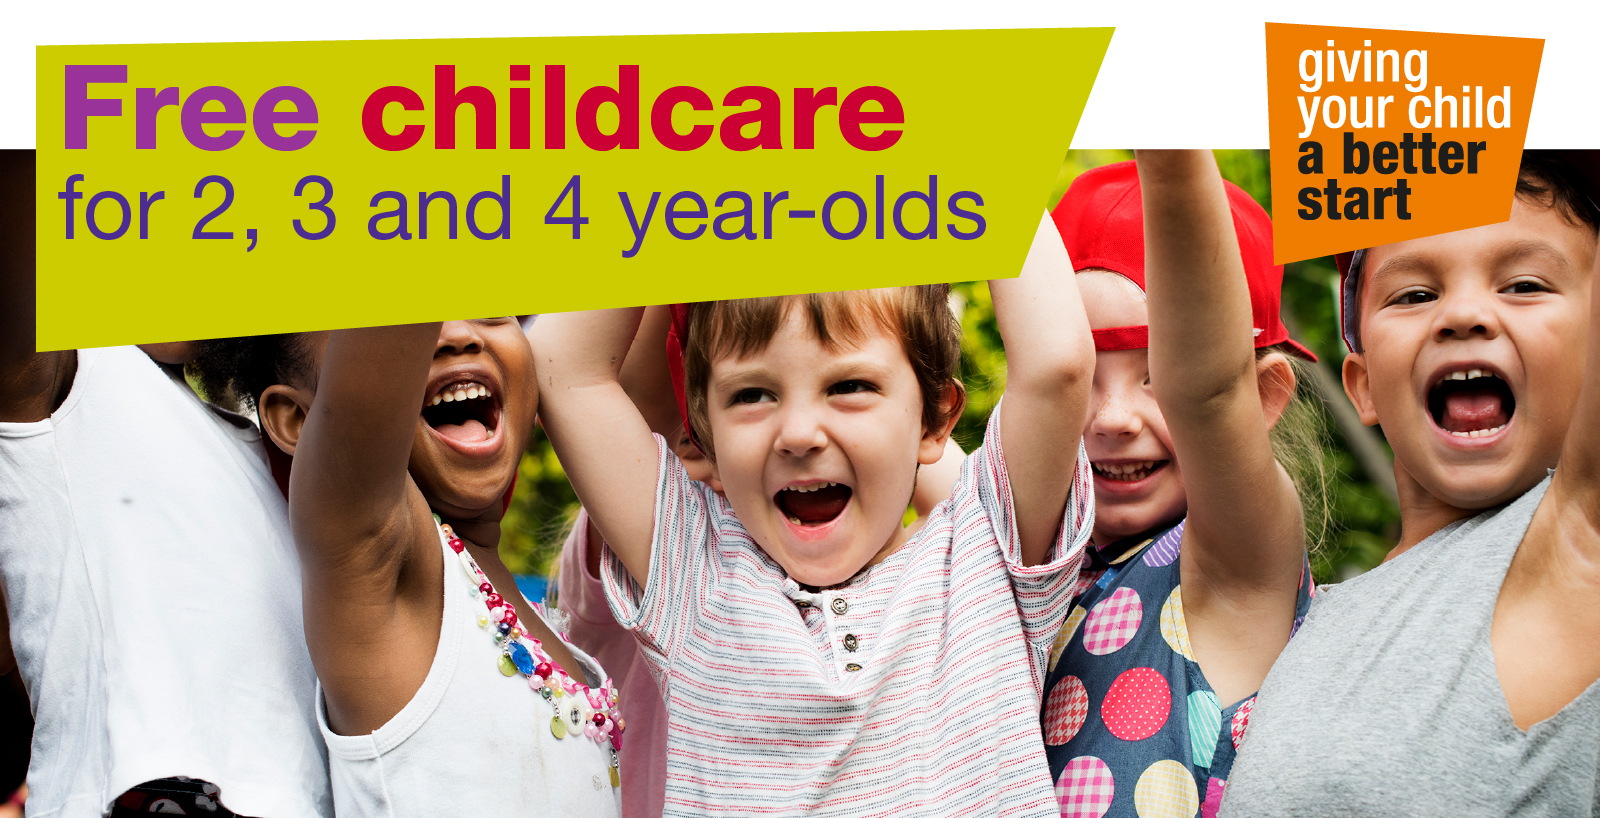 Are you missing out on free childcare?